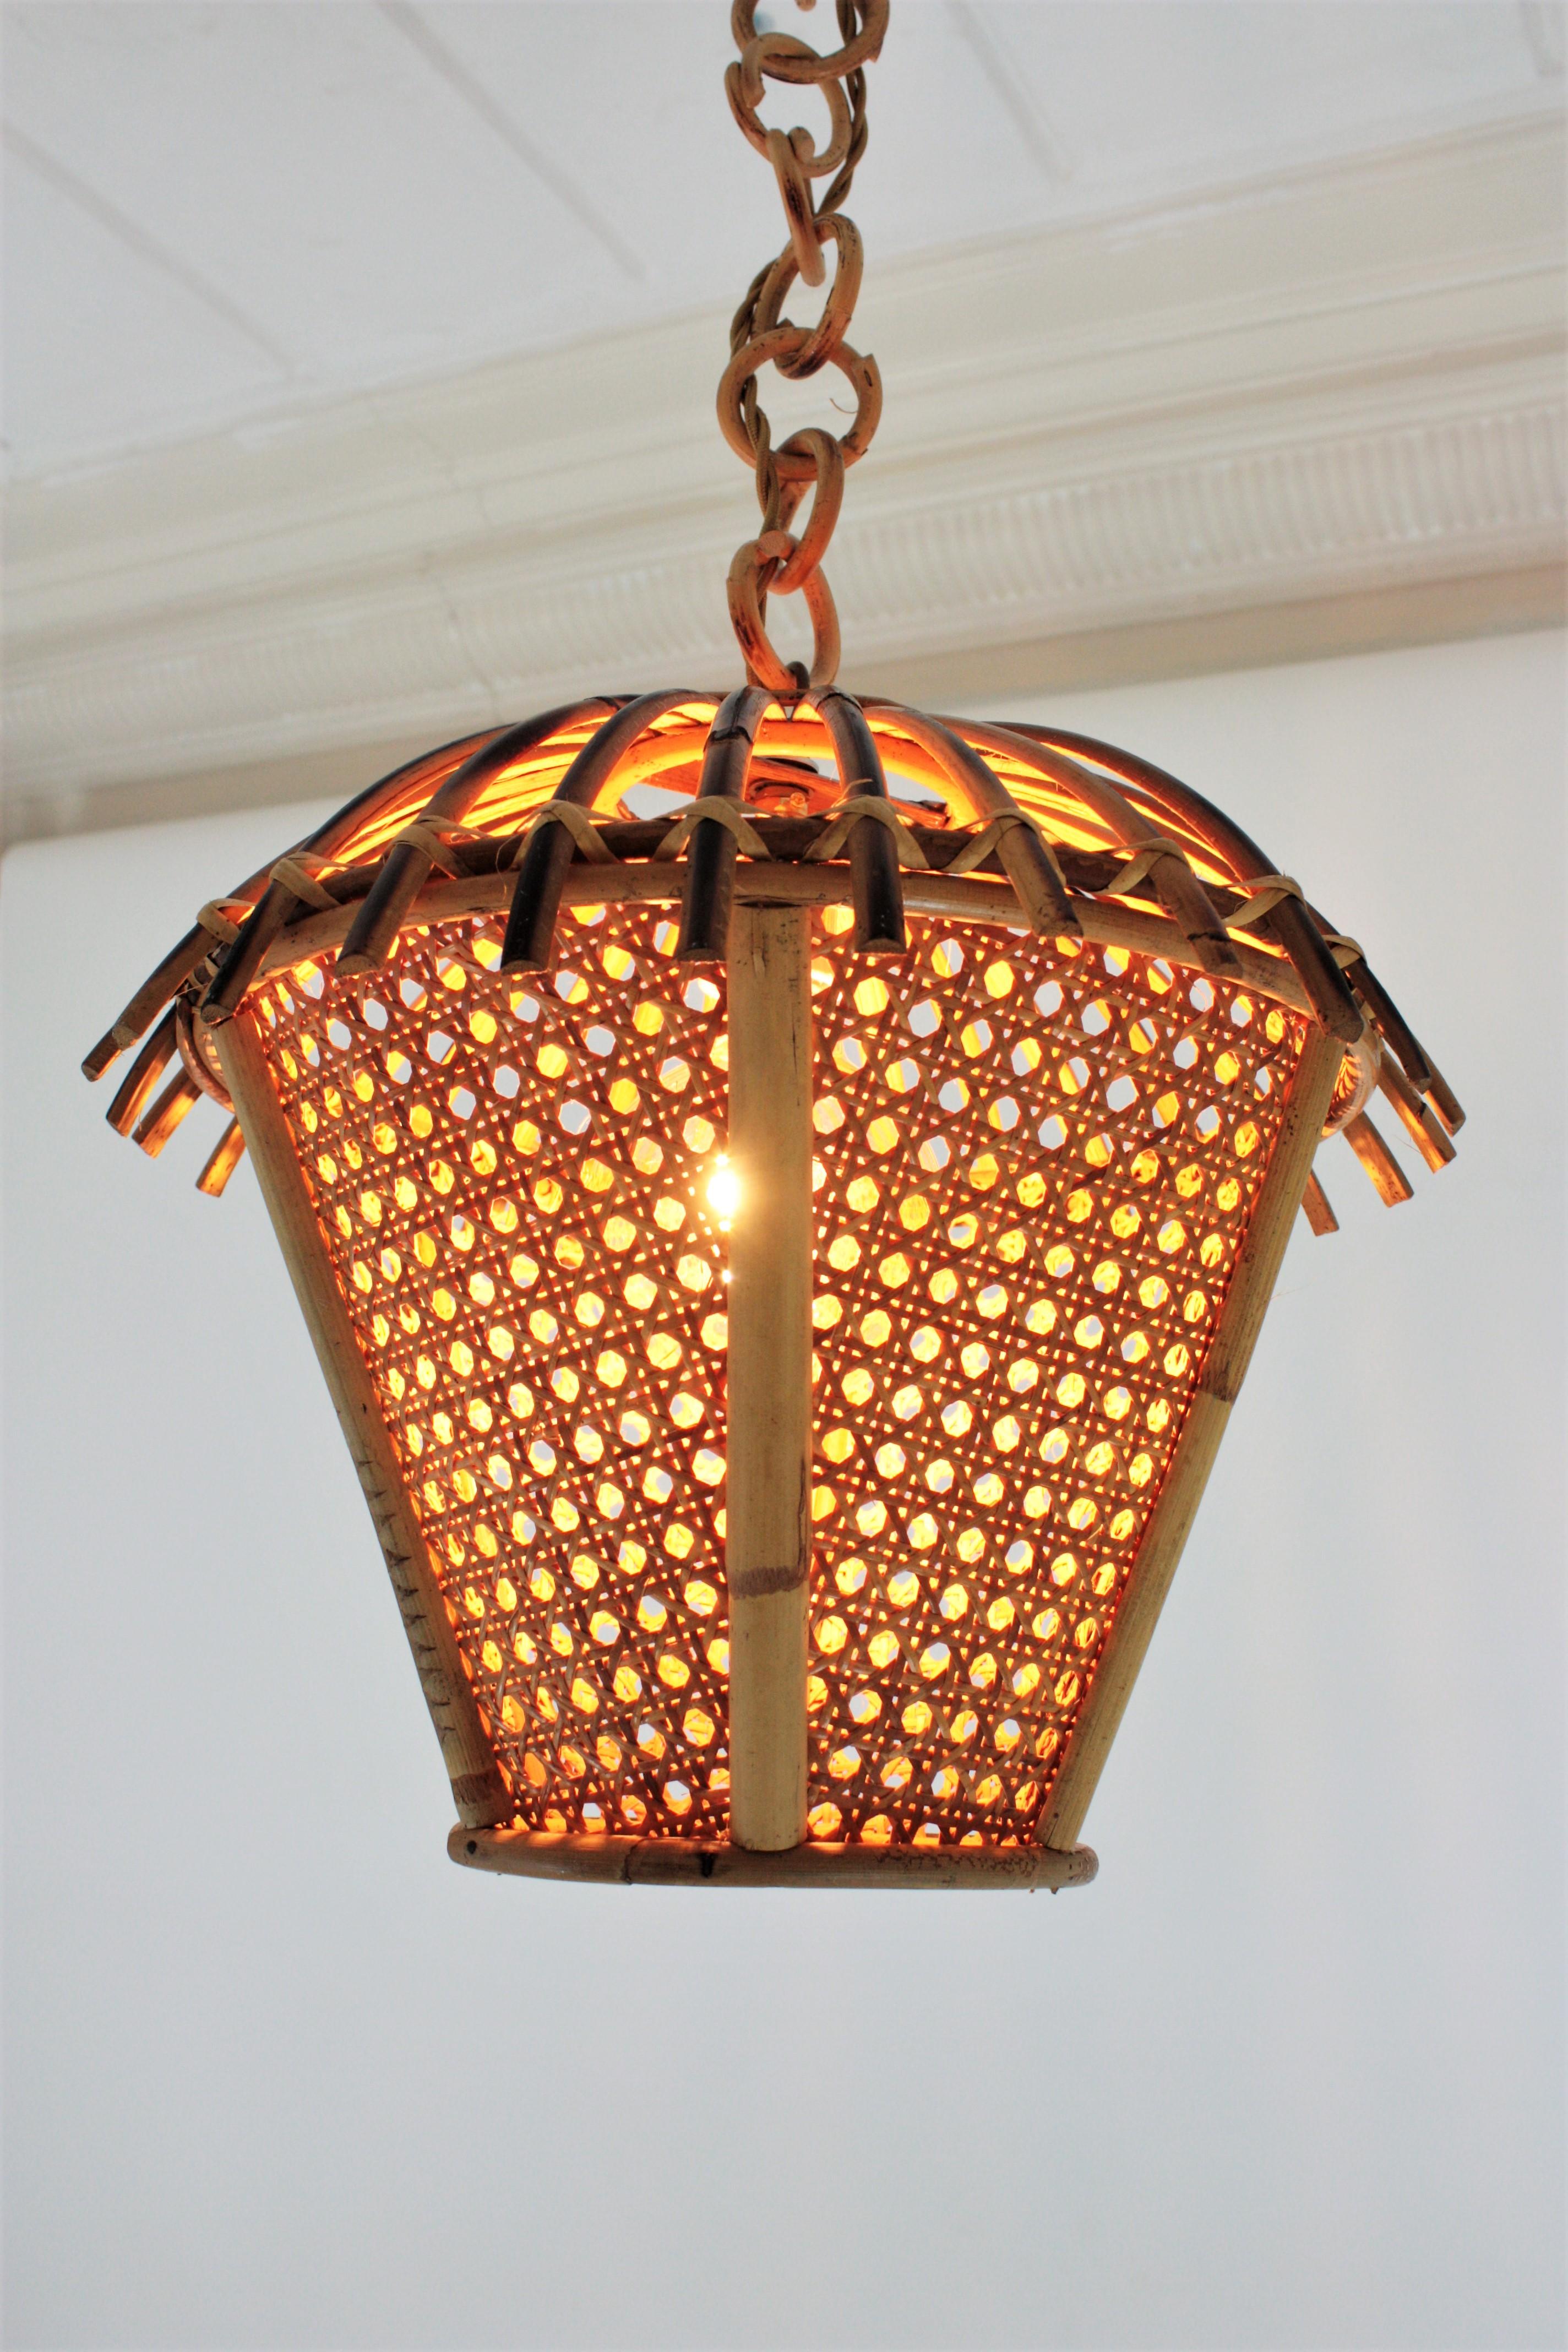 Italian Modernist Rattan and Wicker Wire Pagoda Pendant Hanging Light, 1960s For Sale 1